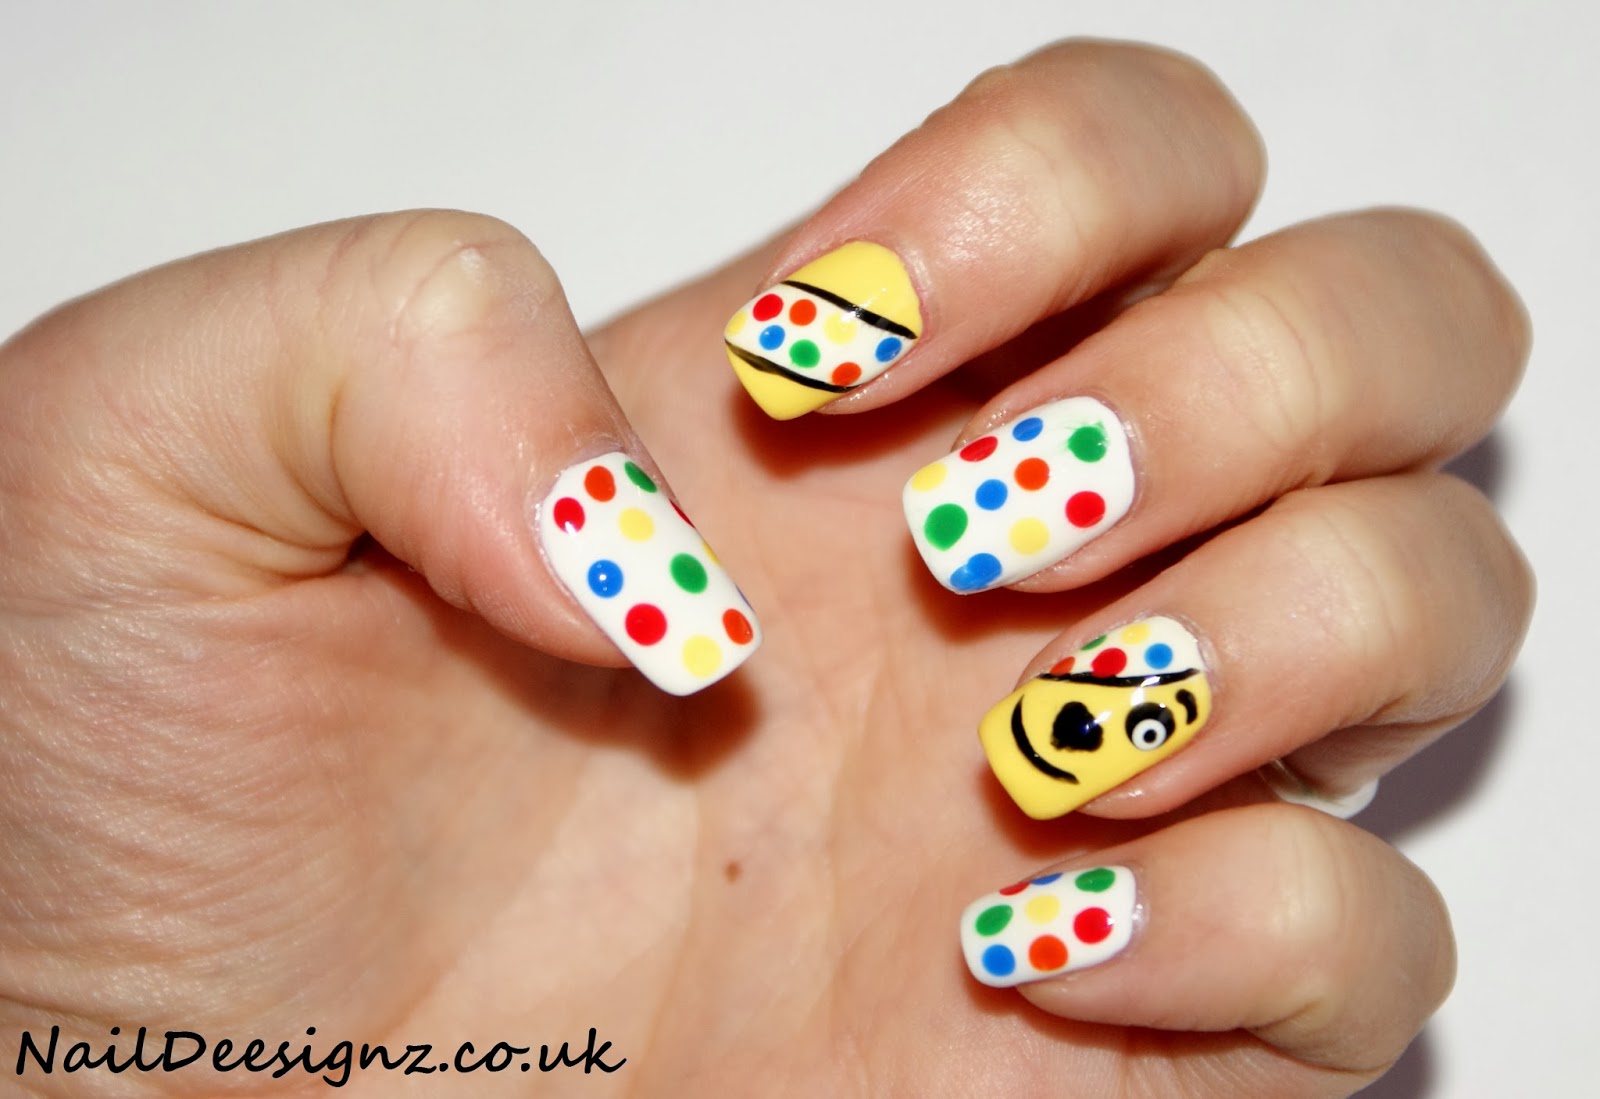 1. Nail Art Designs for Kids - wide 6